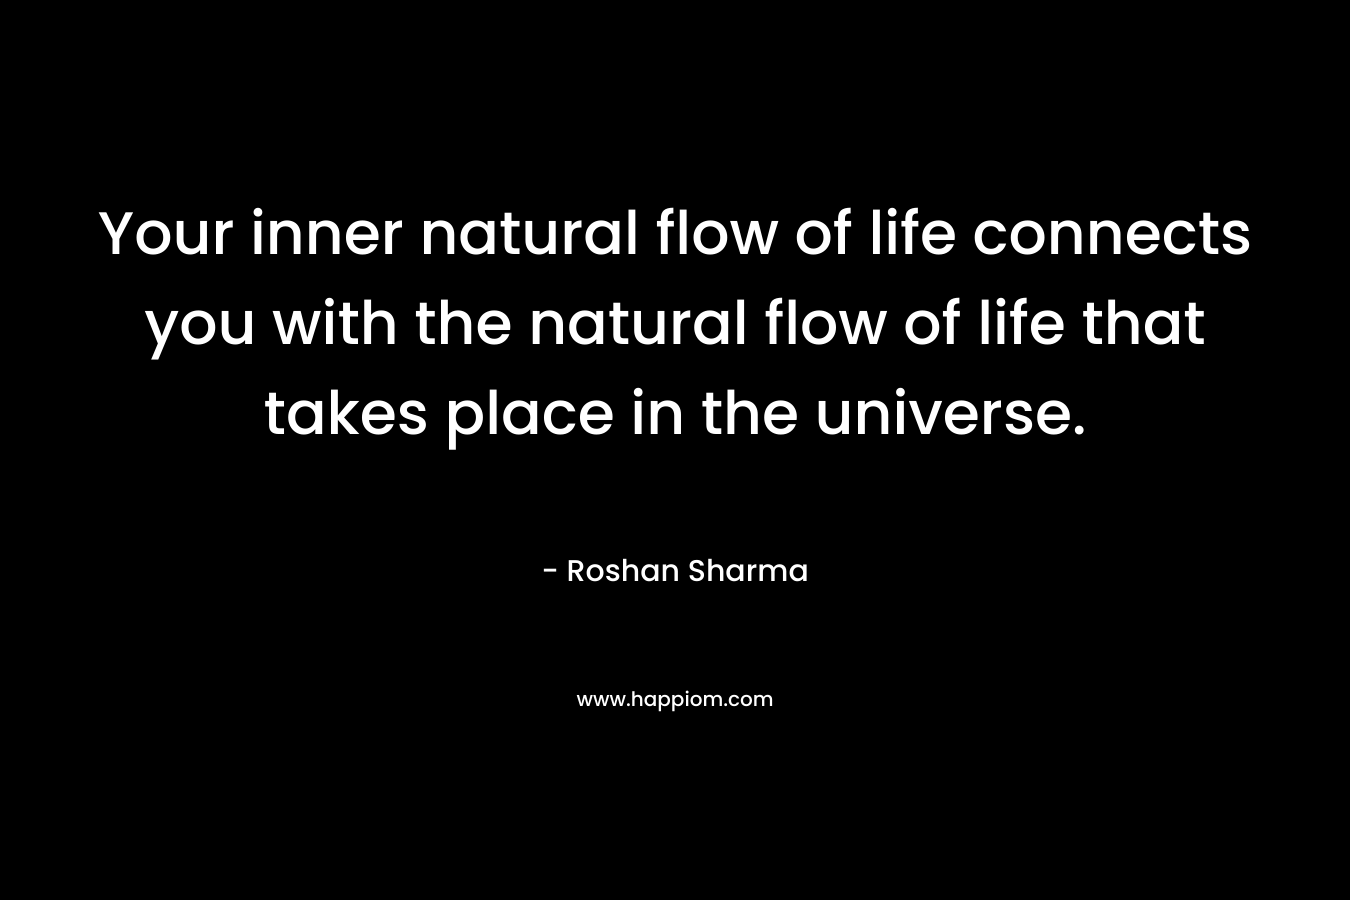 Your inner natural flow of life connects you with the natural flow of life that takes place in the universe.